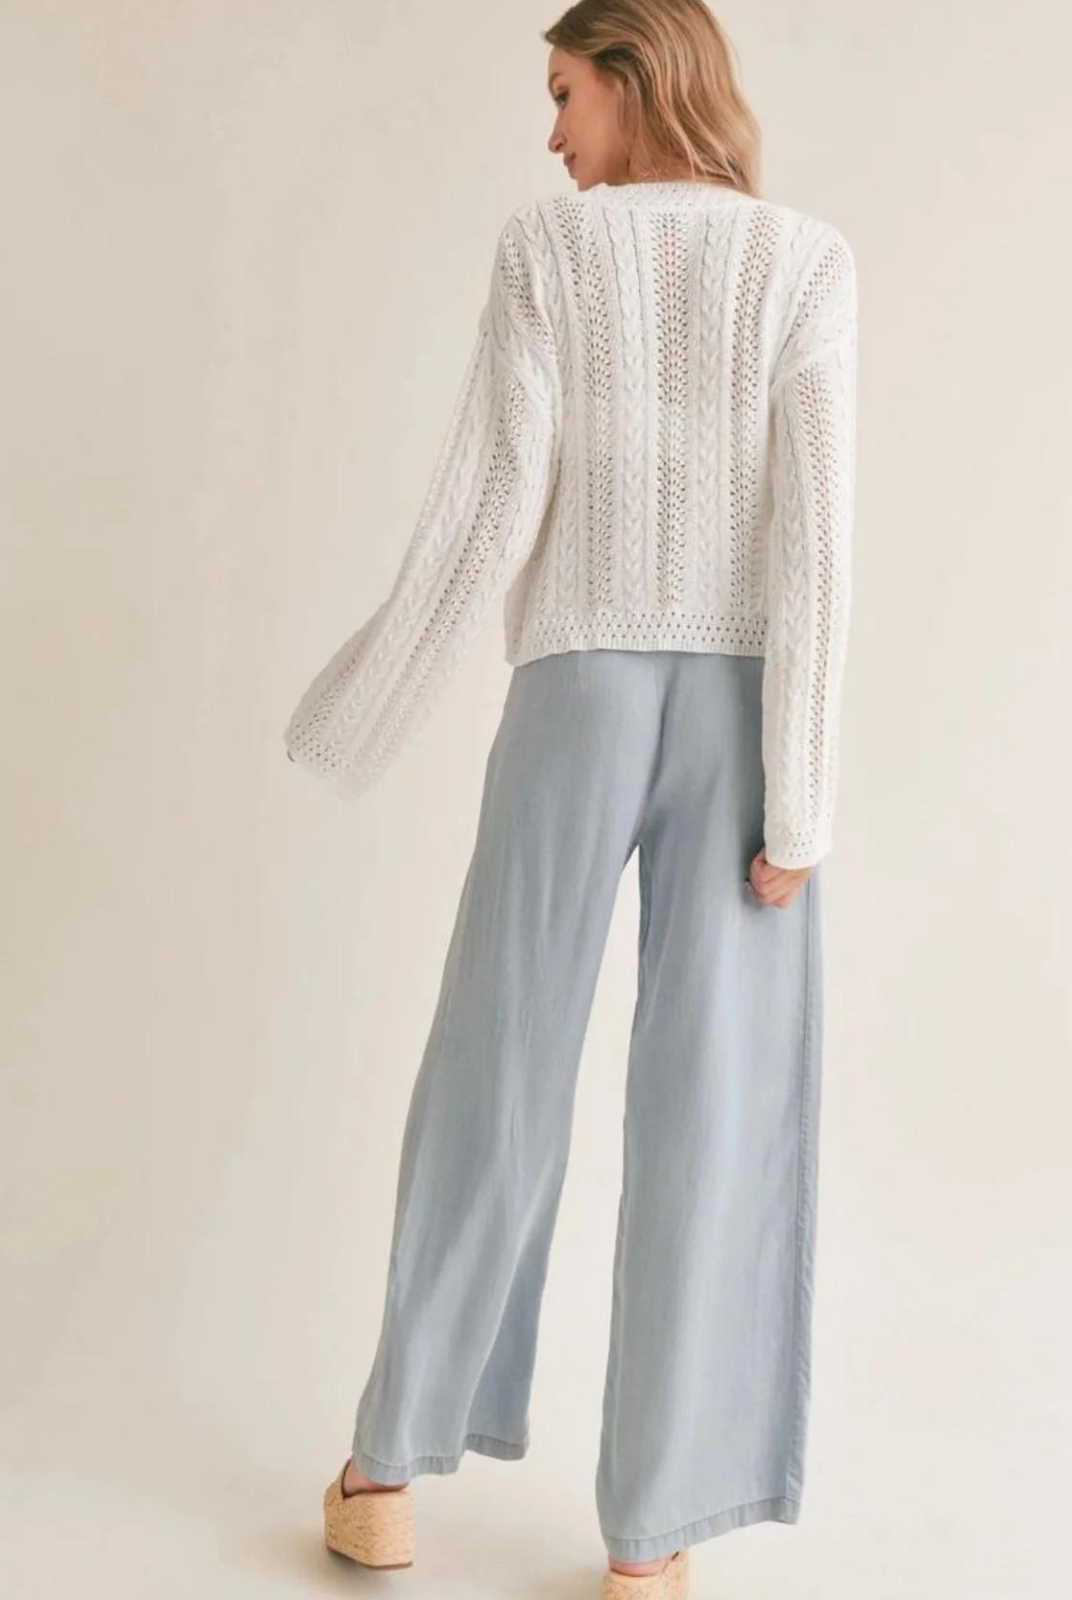 Sadie & Sage Ella Cable Knit Sweater. Elevate your spring wardrobe with our Ella Cable Knit Sweater! Featuring a classic cable knit design and lightweight fabric, this long sleeve sweater in white is perfect for layering and keeping you warm without weighing you down.